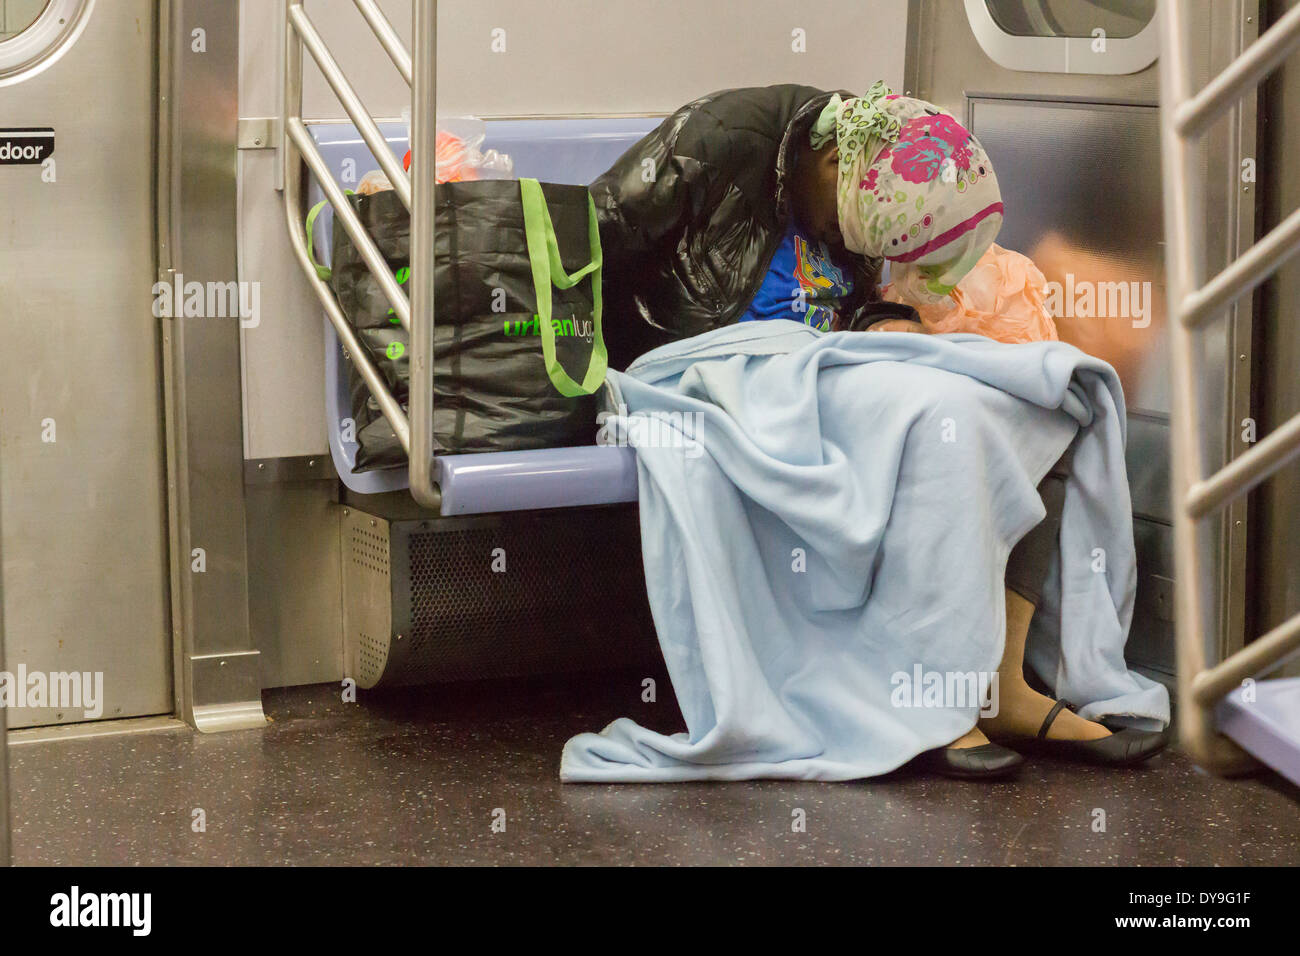 Un-domiciled individual sleeps in the subway in New York on Tuesday, April 8, 2014. (© Richard B. Levine) Stock Photo